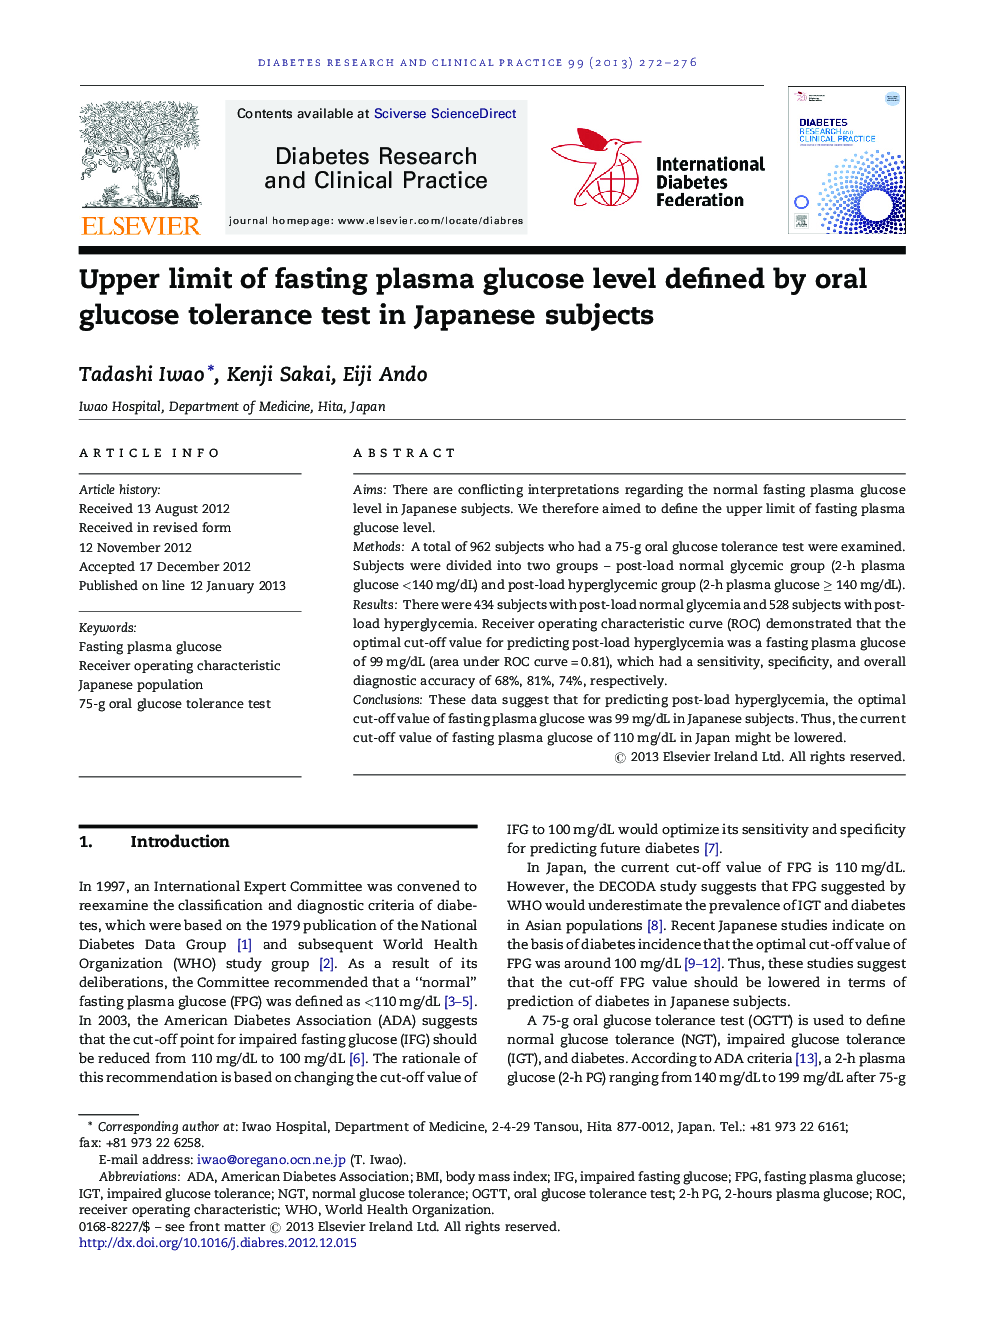 Upper limit of fasting plasma glucose level defined by oral glucose tolerance test in Japanese subjects